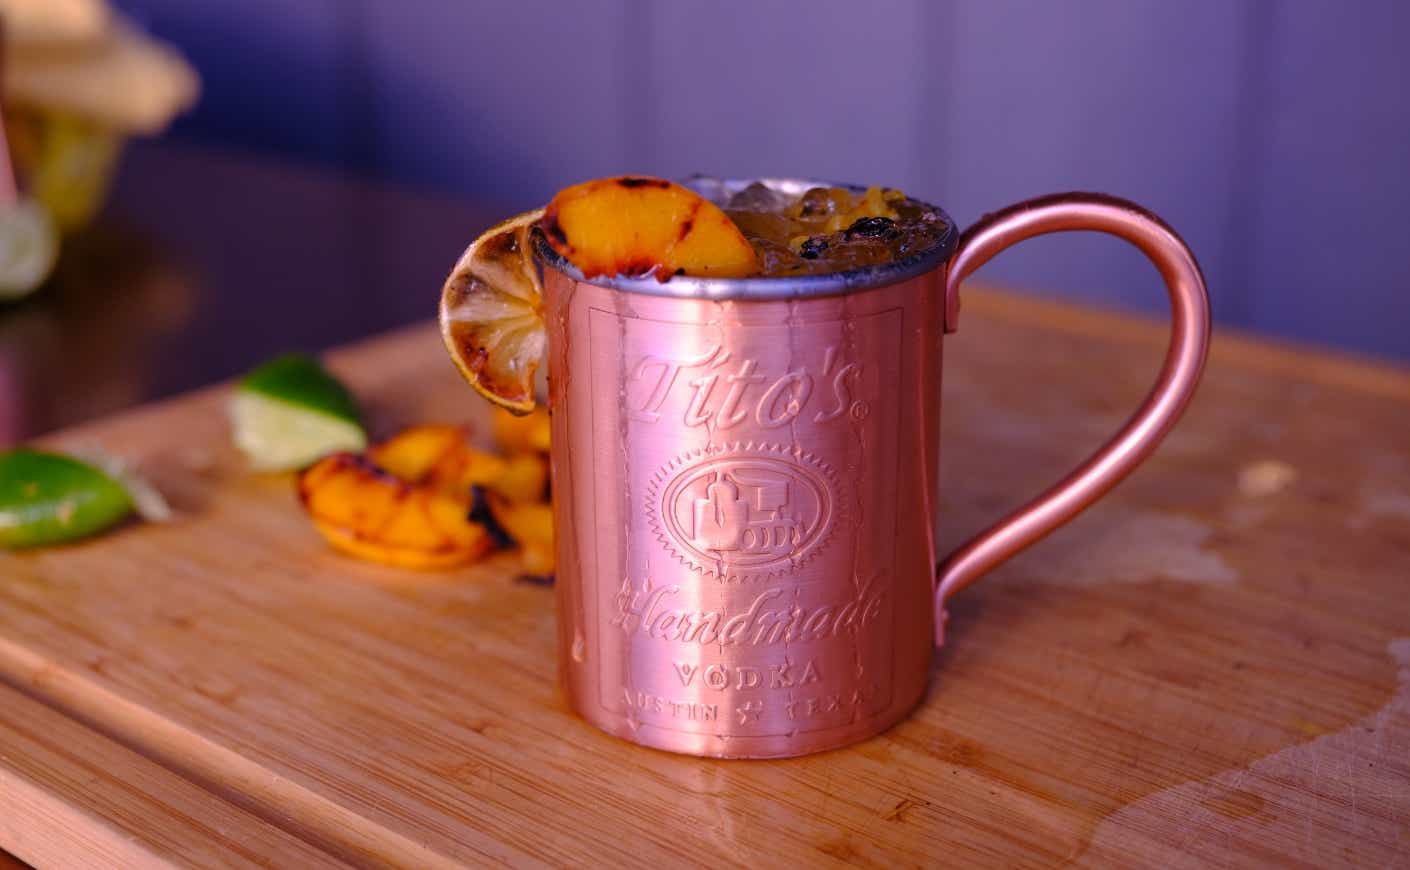 A copper cup with a grilled peach garnish